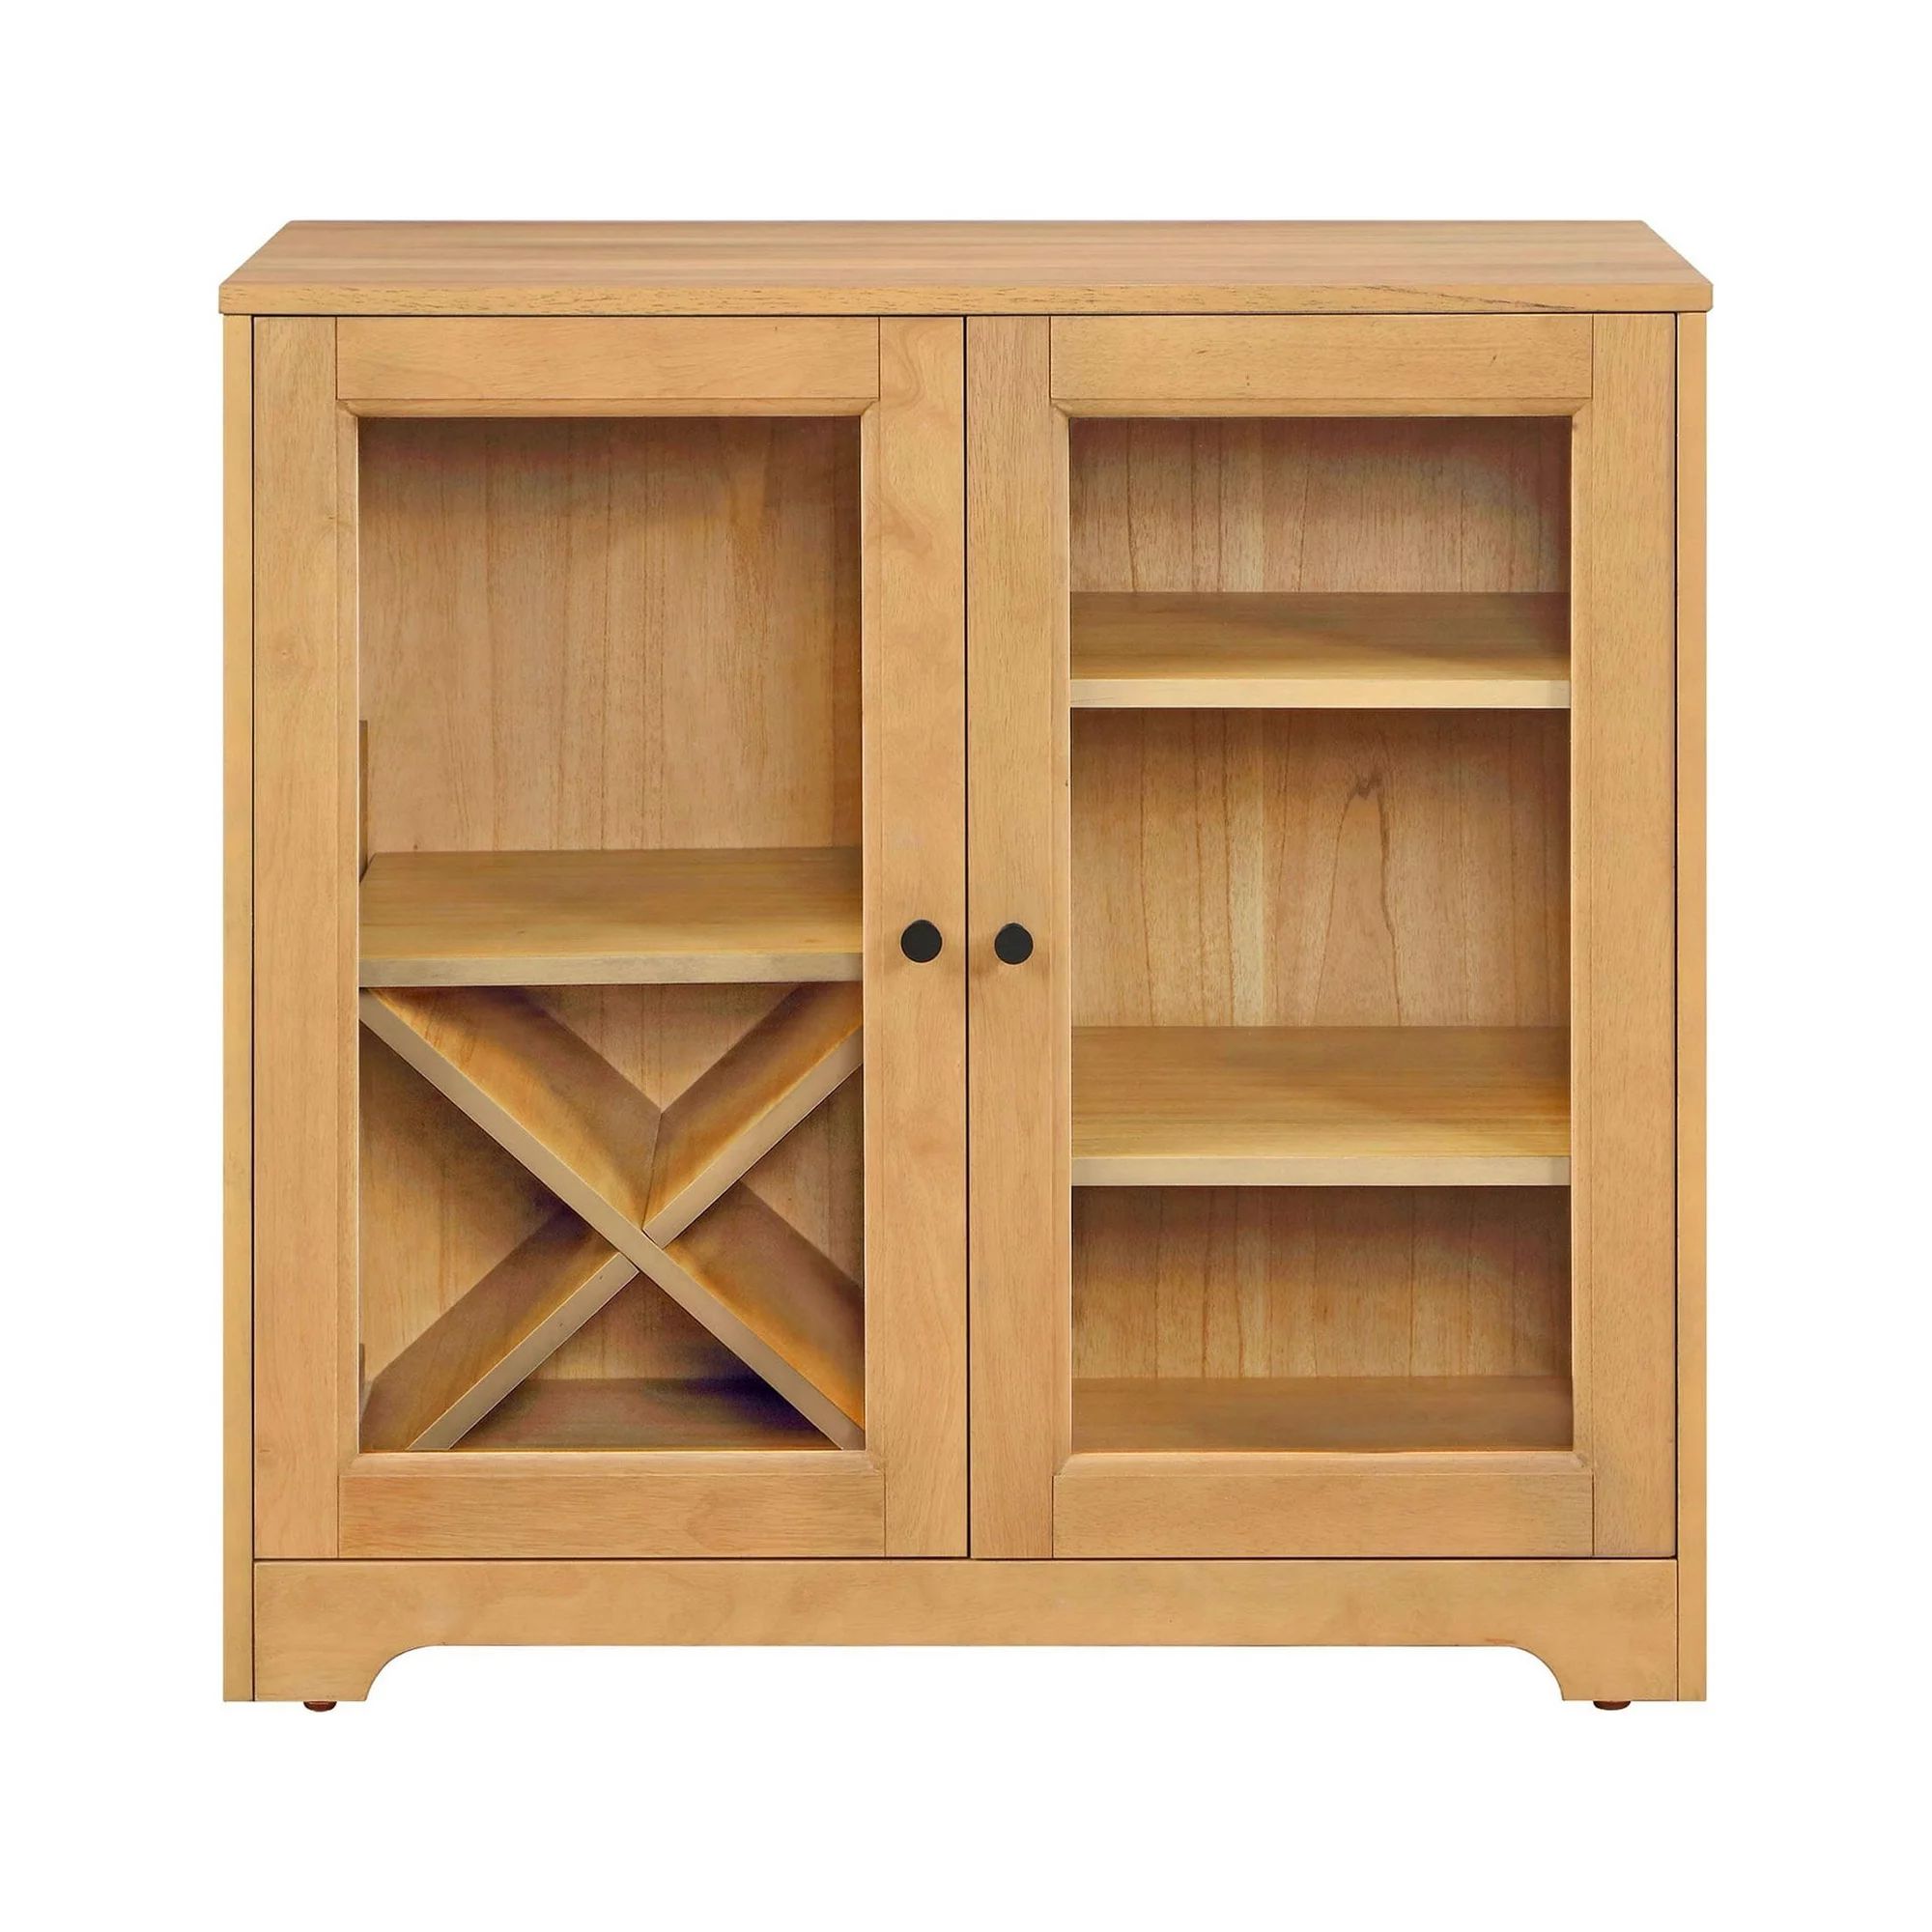 Better Homes & Gardens Aster Bar Cabinet with Solid Wood Frame, Natural Oak finish, by Dave & Jen... | Walmart (US)